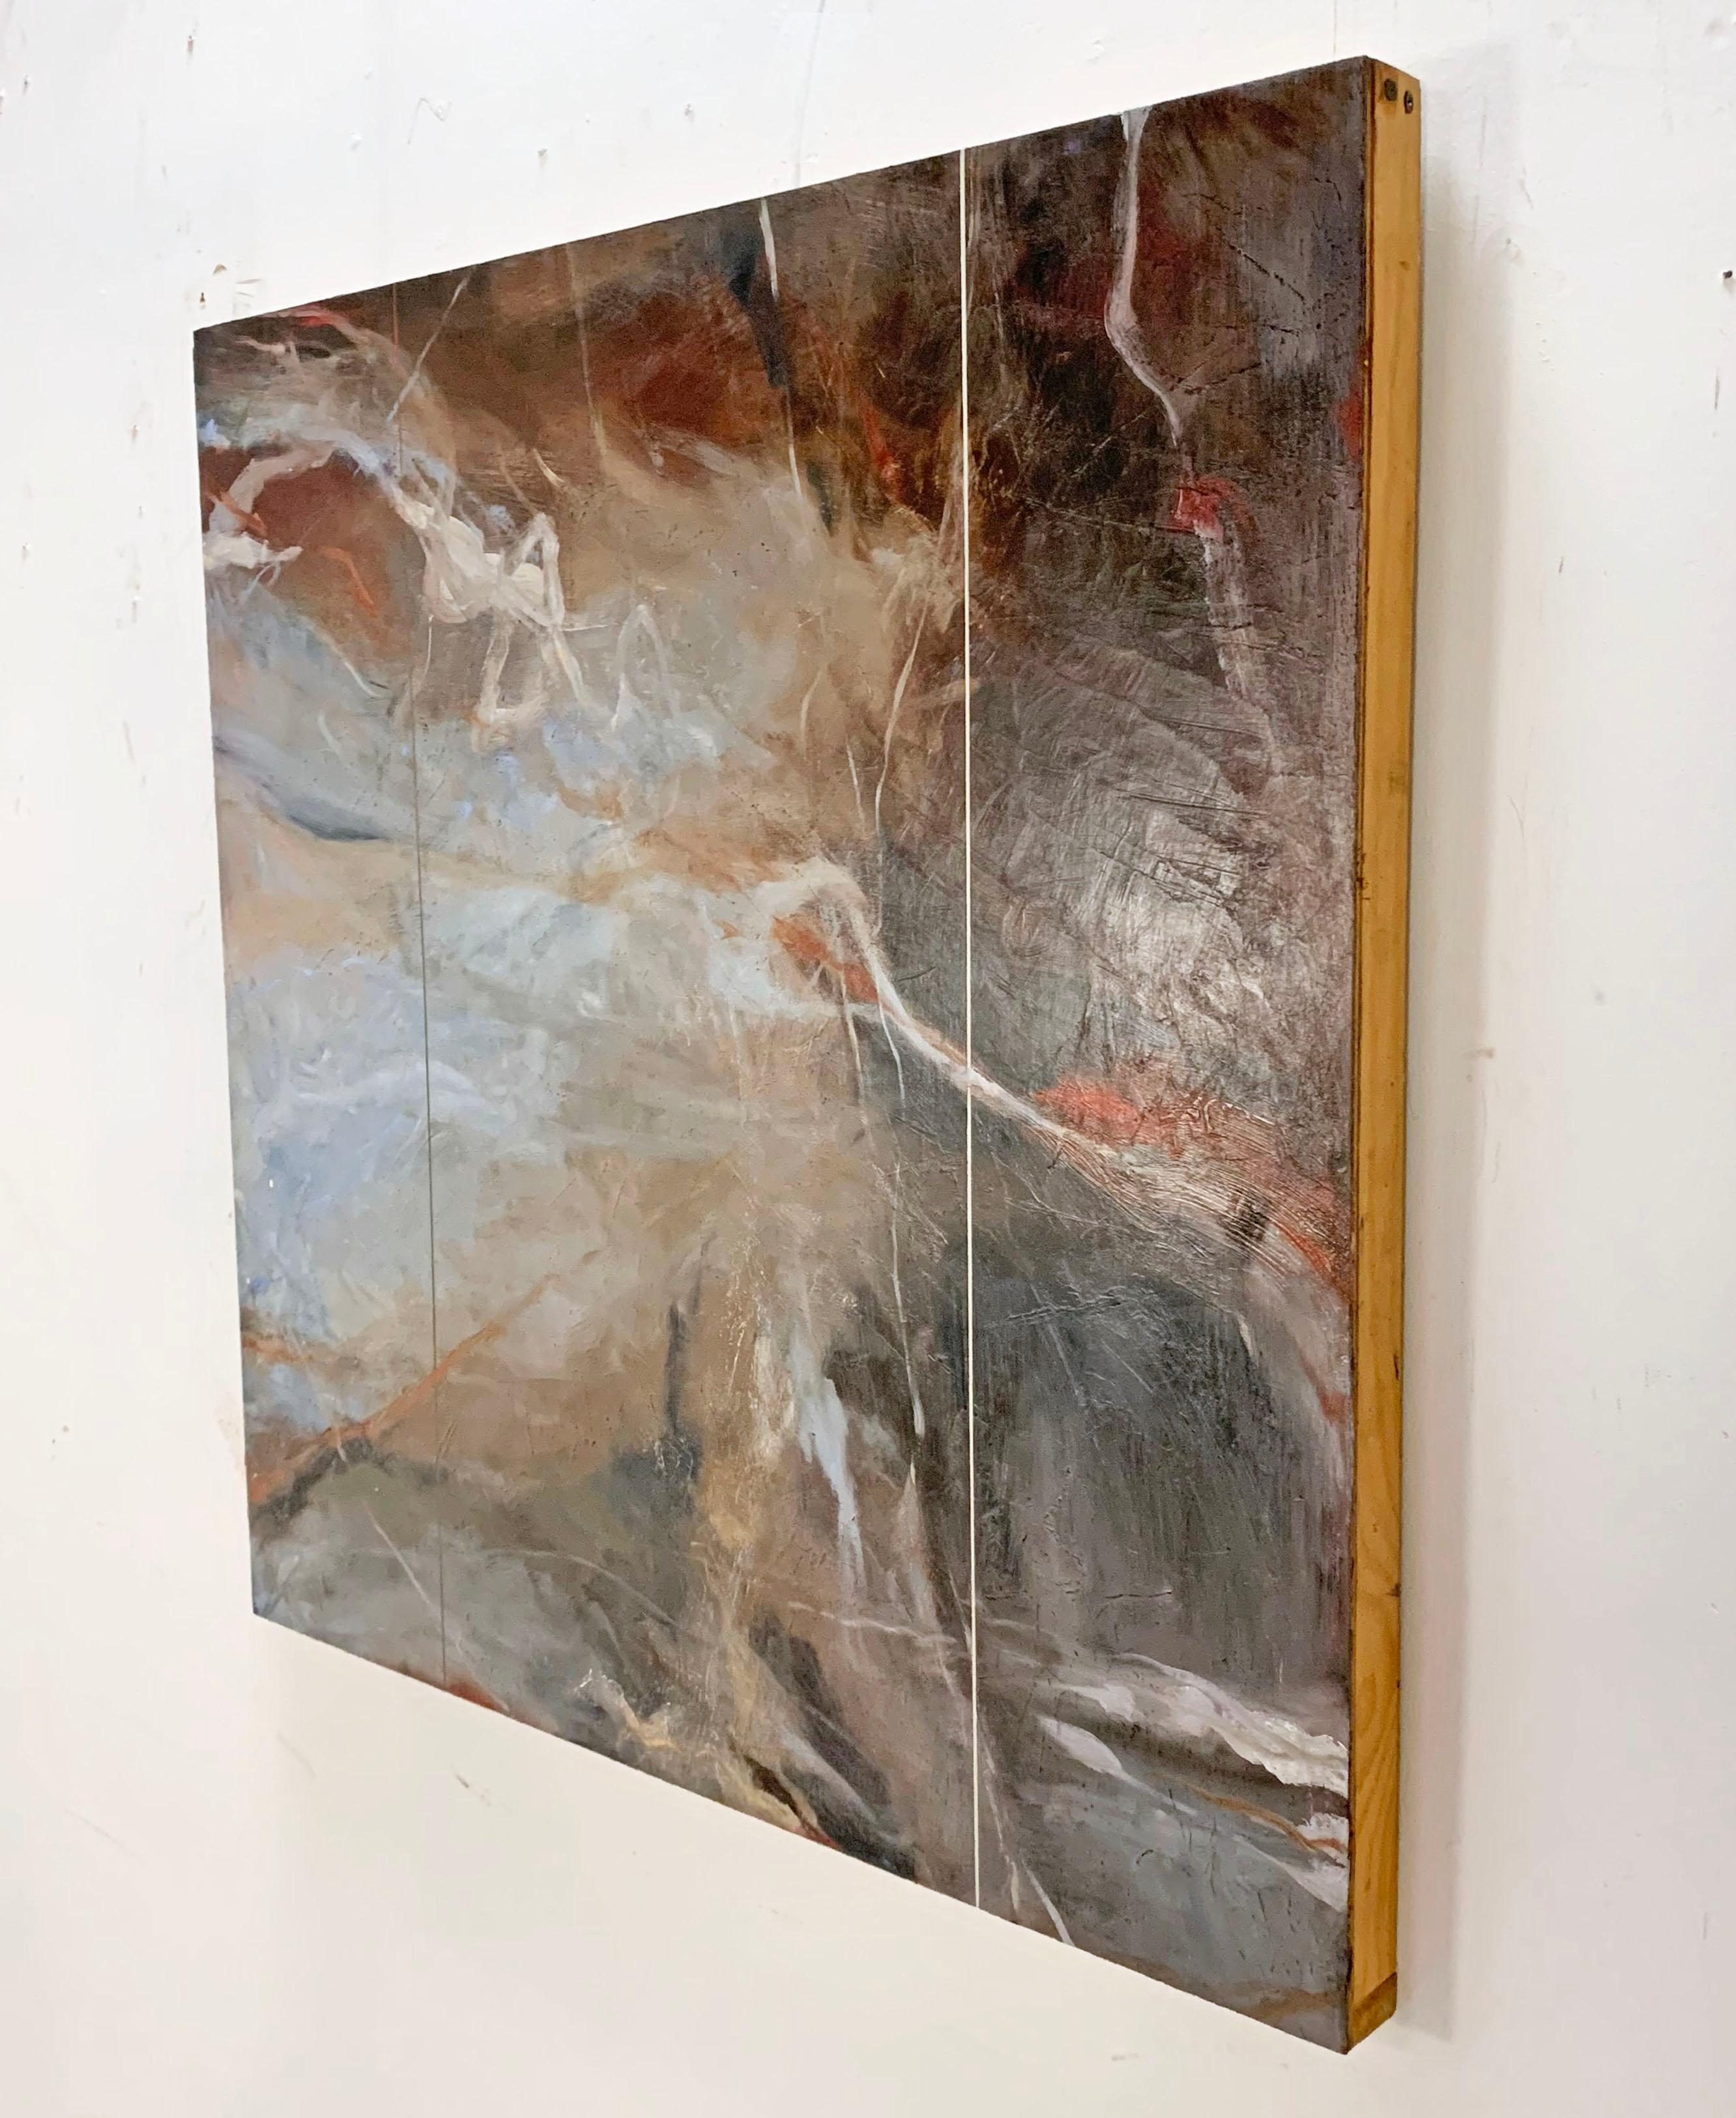 Atmospheric faux-triptych Postmodern abstract painting by noted Massachusetts artist Judith Solomon dated 1998. There is an almost romantic appeal to this work, reminiscent of the storm paintings of English artist J.M.W. Turner, which this painting